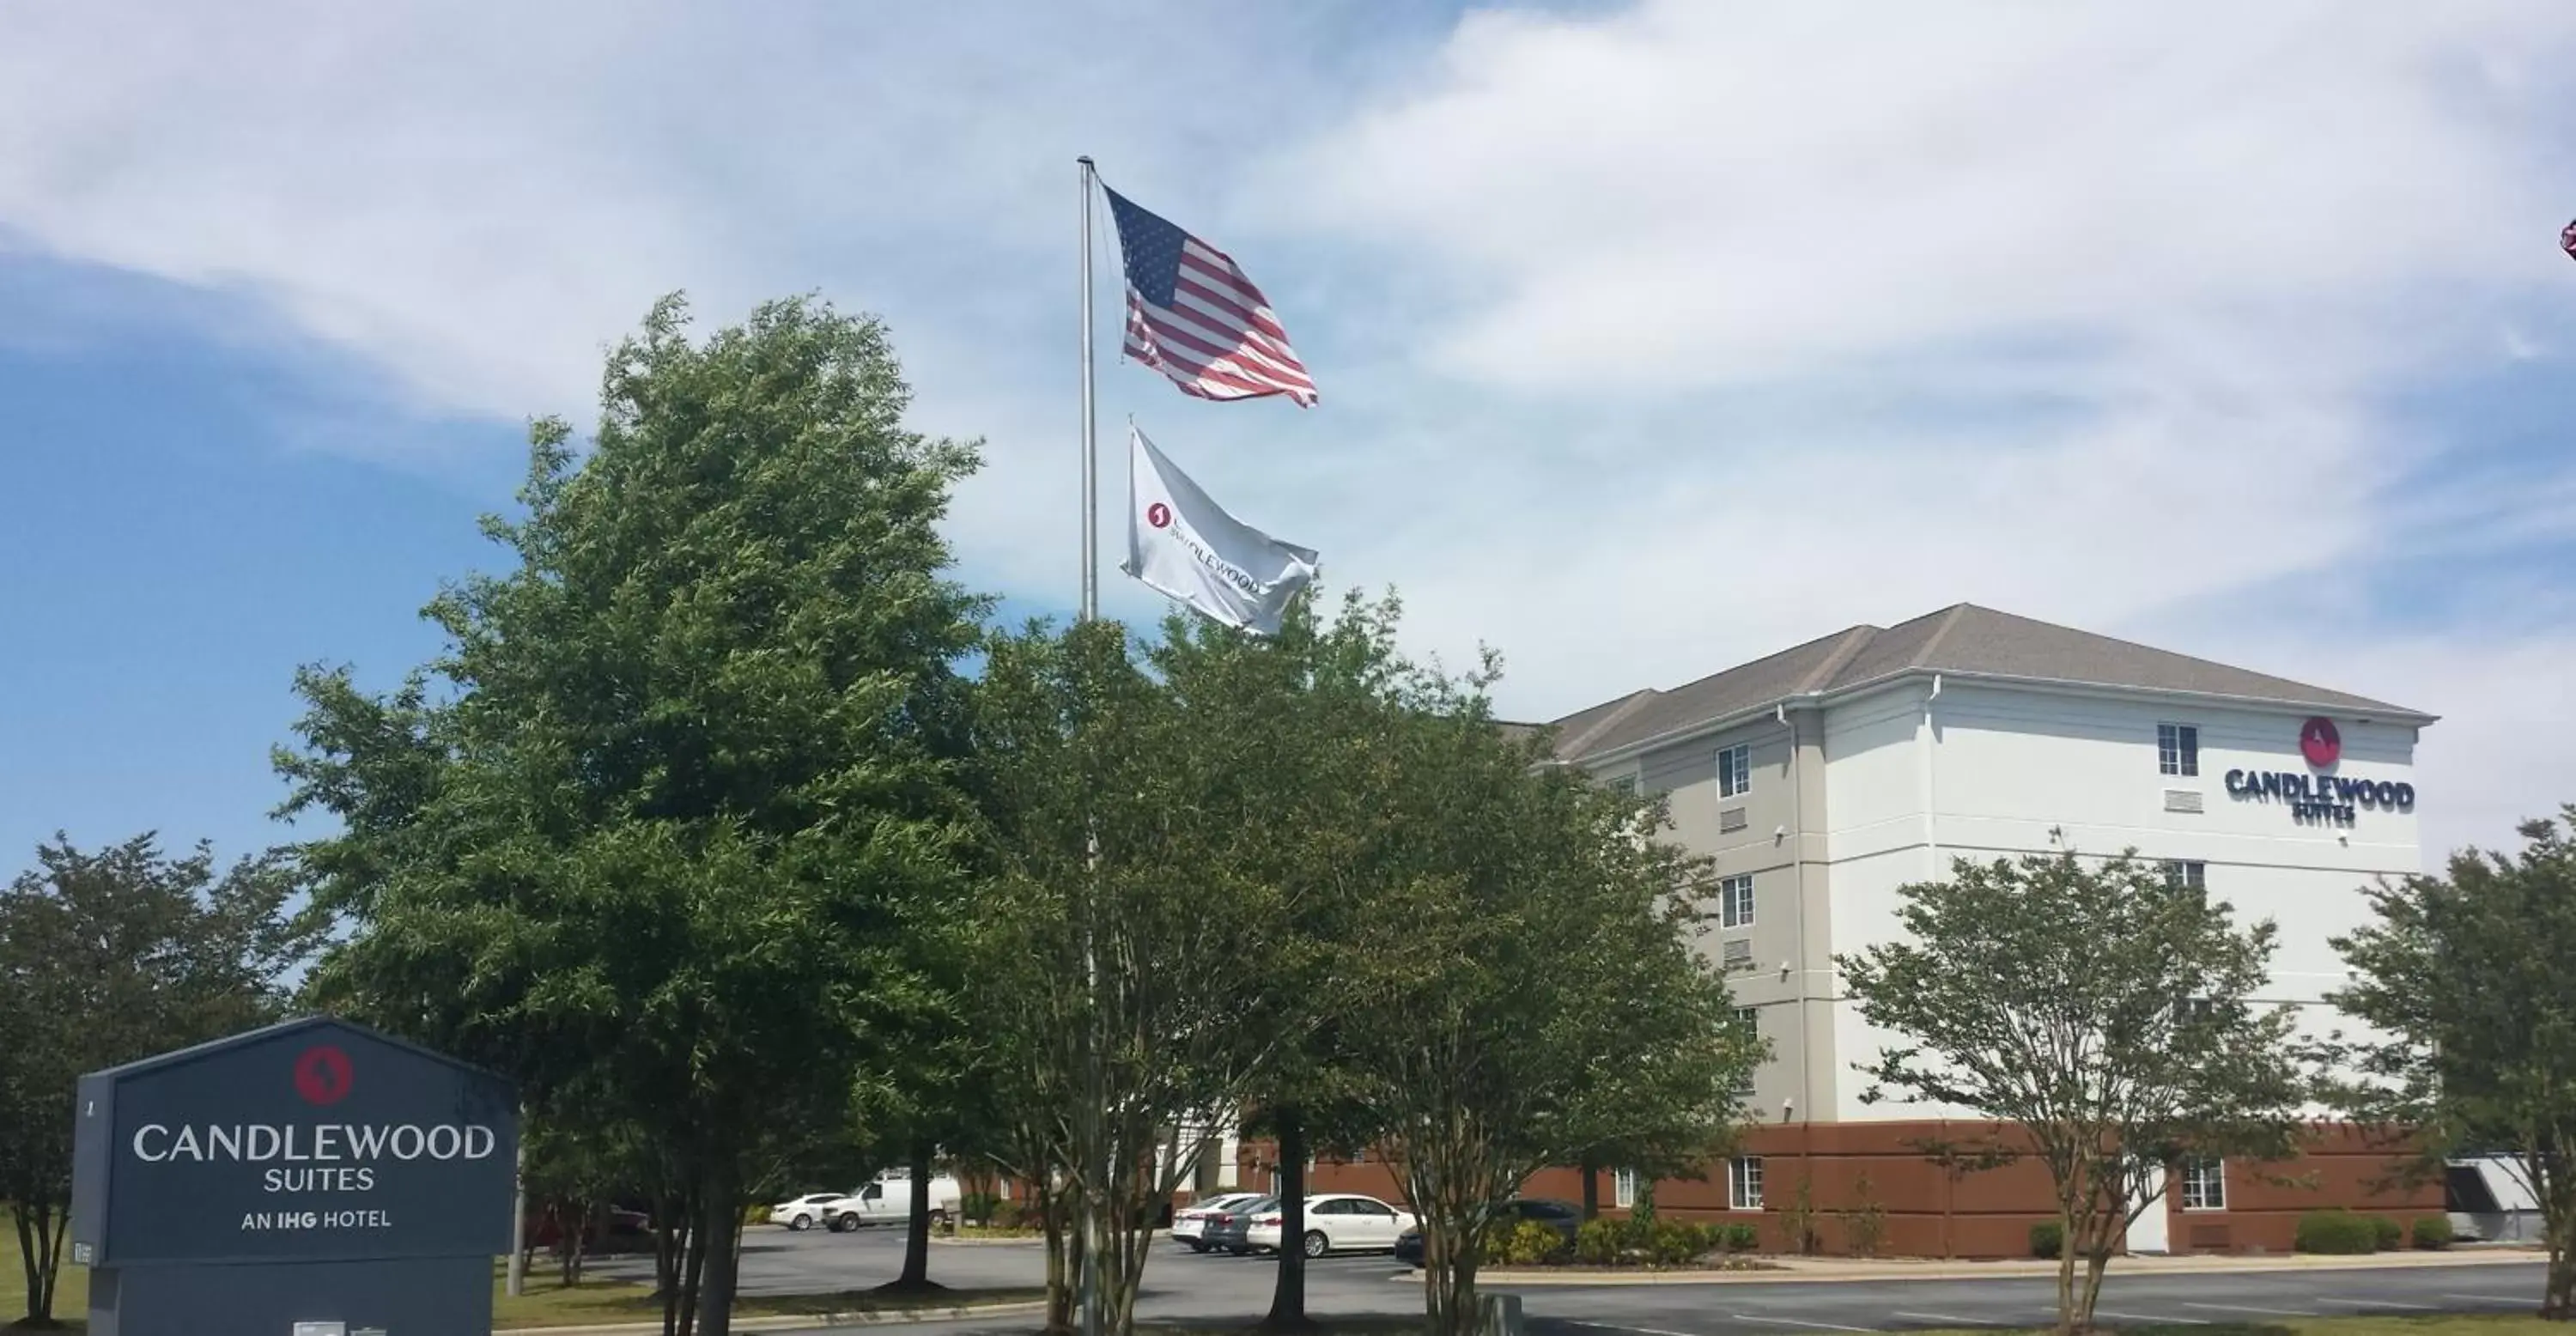 Property building in Candlewood Suites Greenville NC, an IHG Hotel